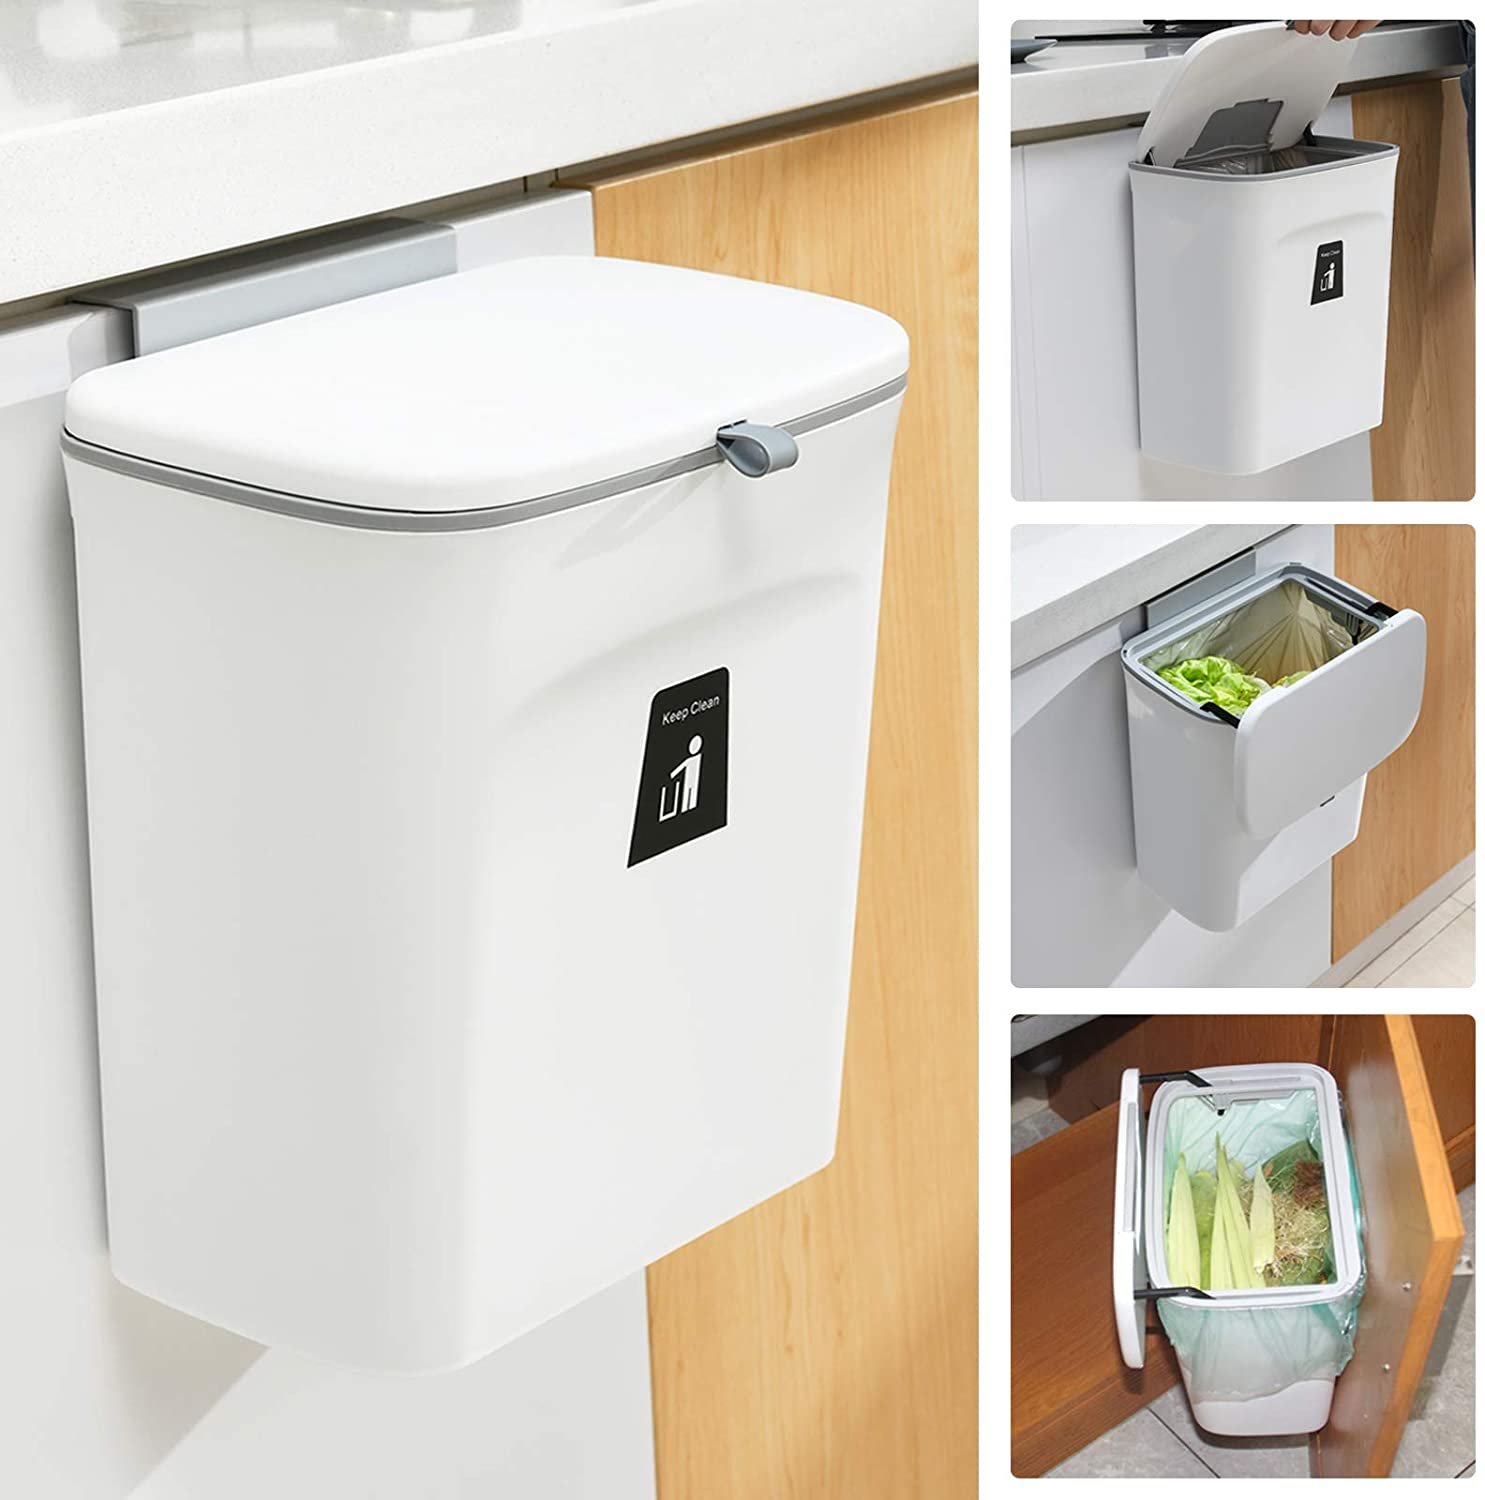 Tiyafuro Kitchen Compost Bin for Counter Top or Under Sink, Hanging Trash Can (Copy) (Copy) (Copy) (Copy)